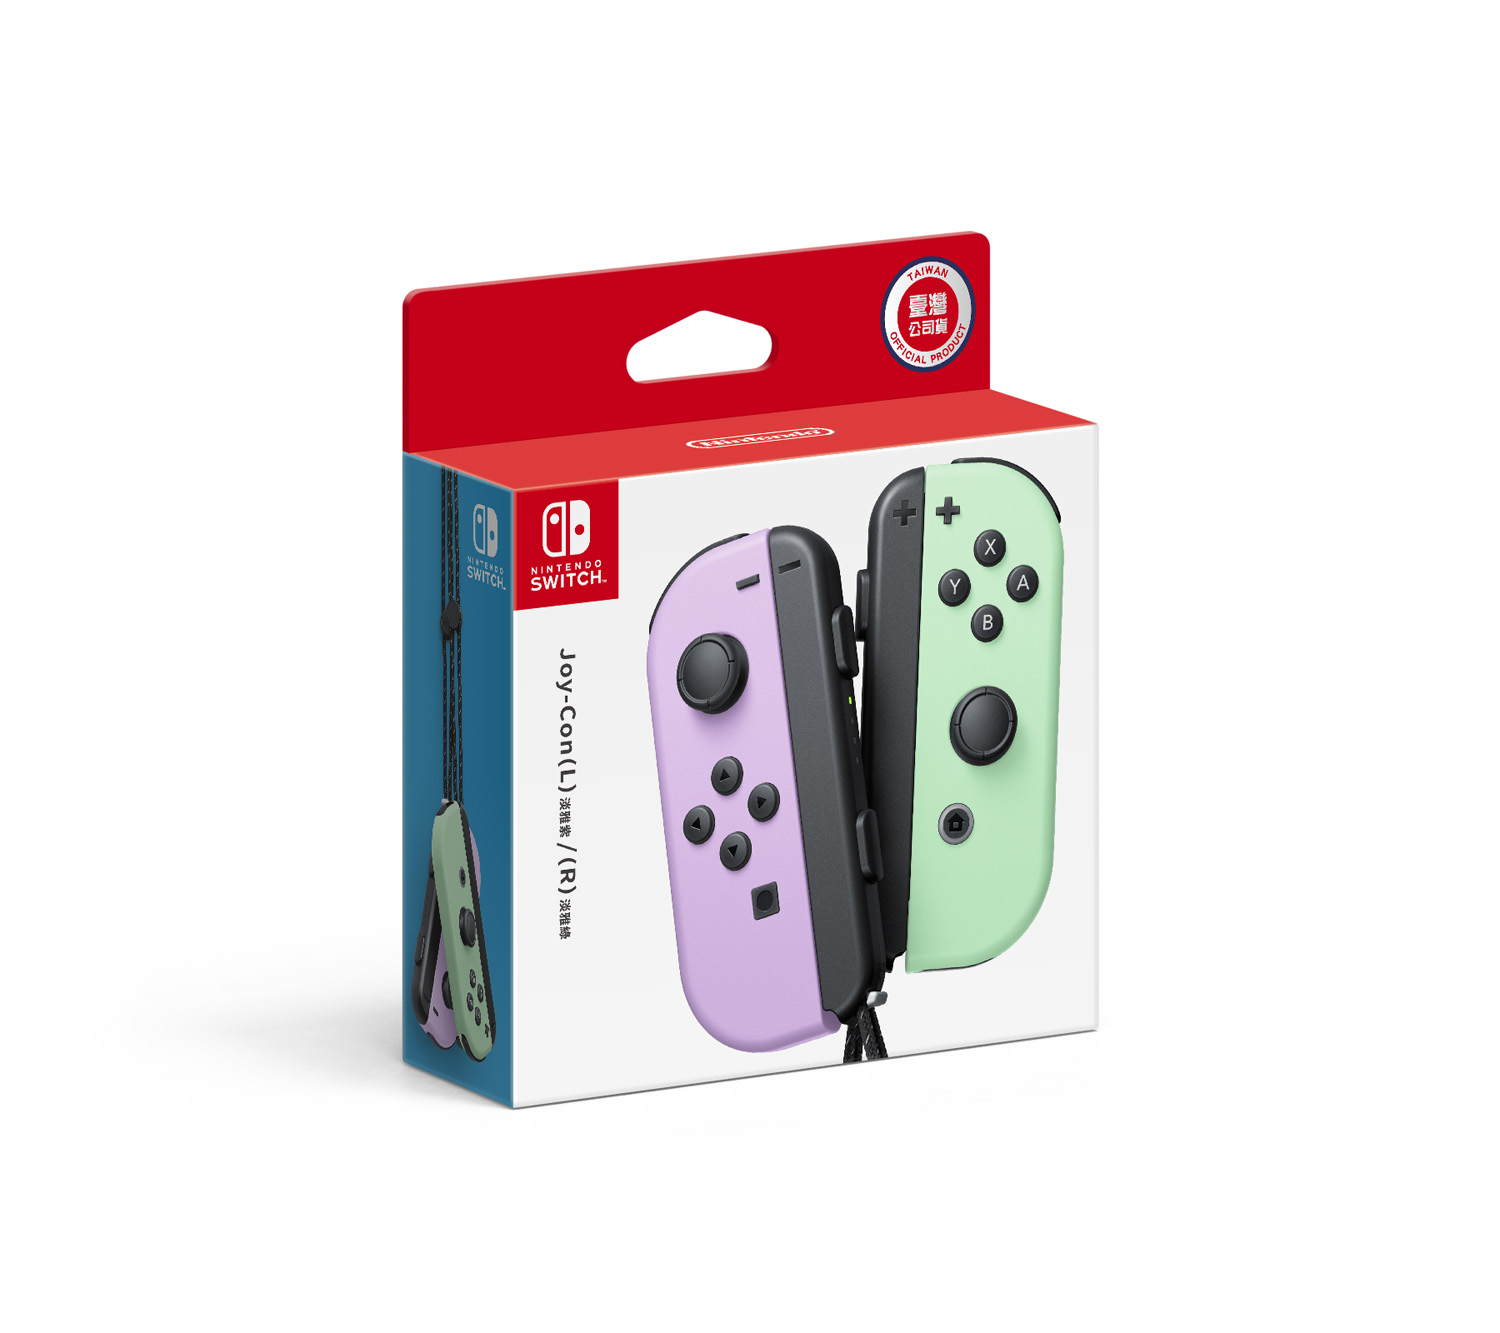 Nintendo Switch Accessories – JOY-CON, , large image number 1